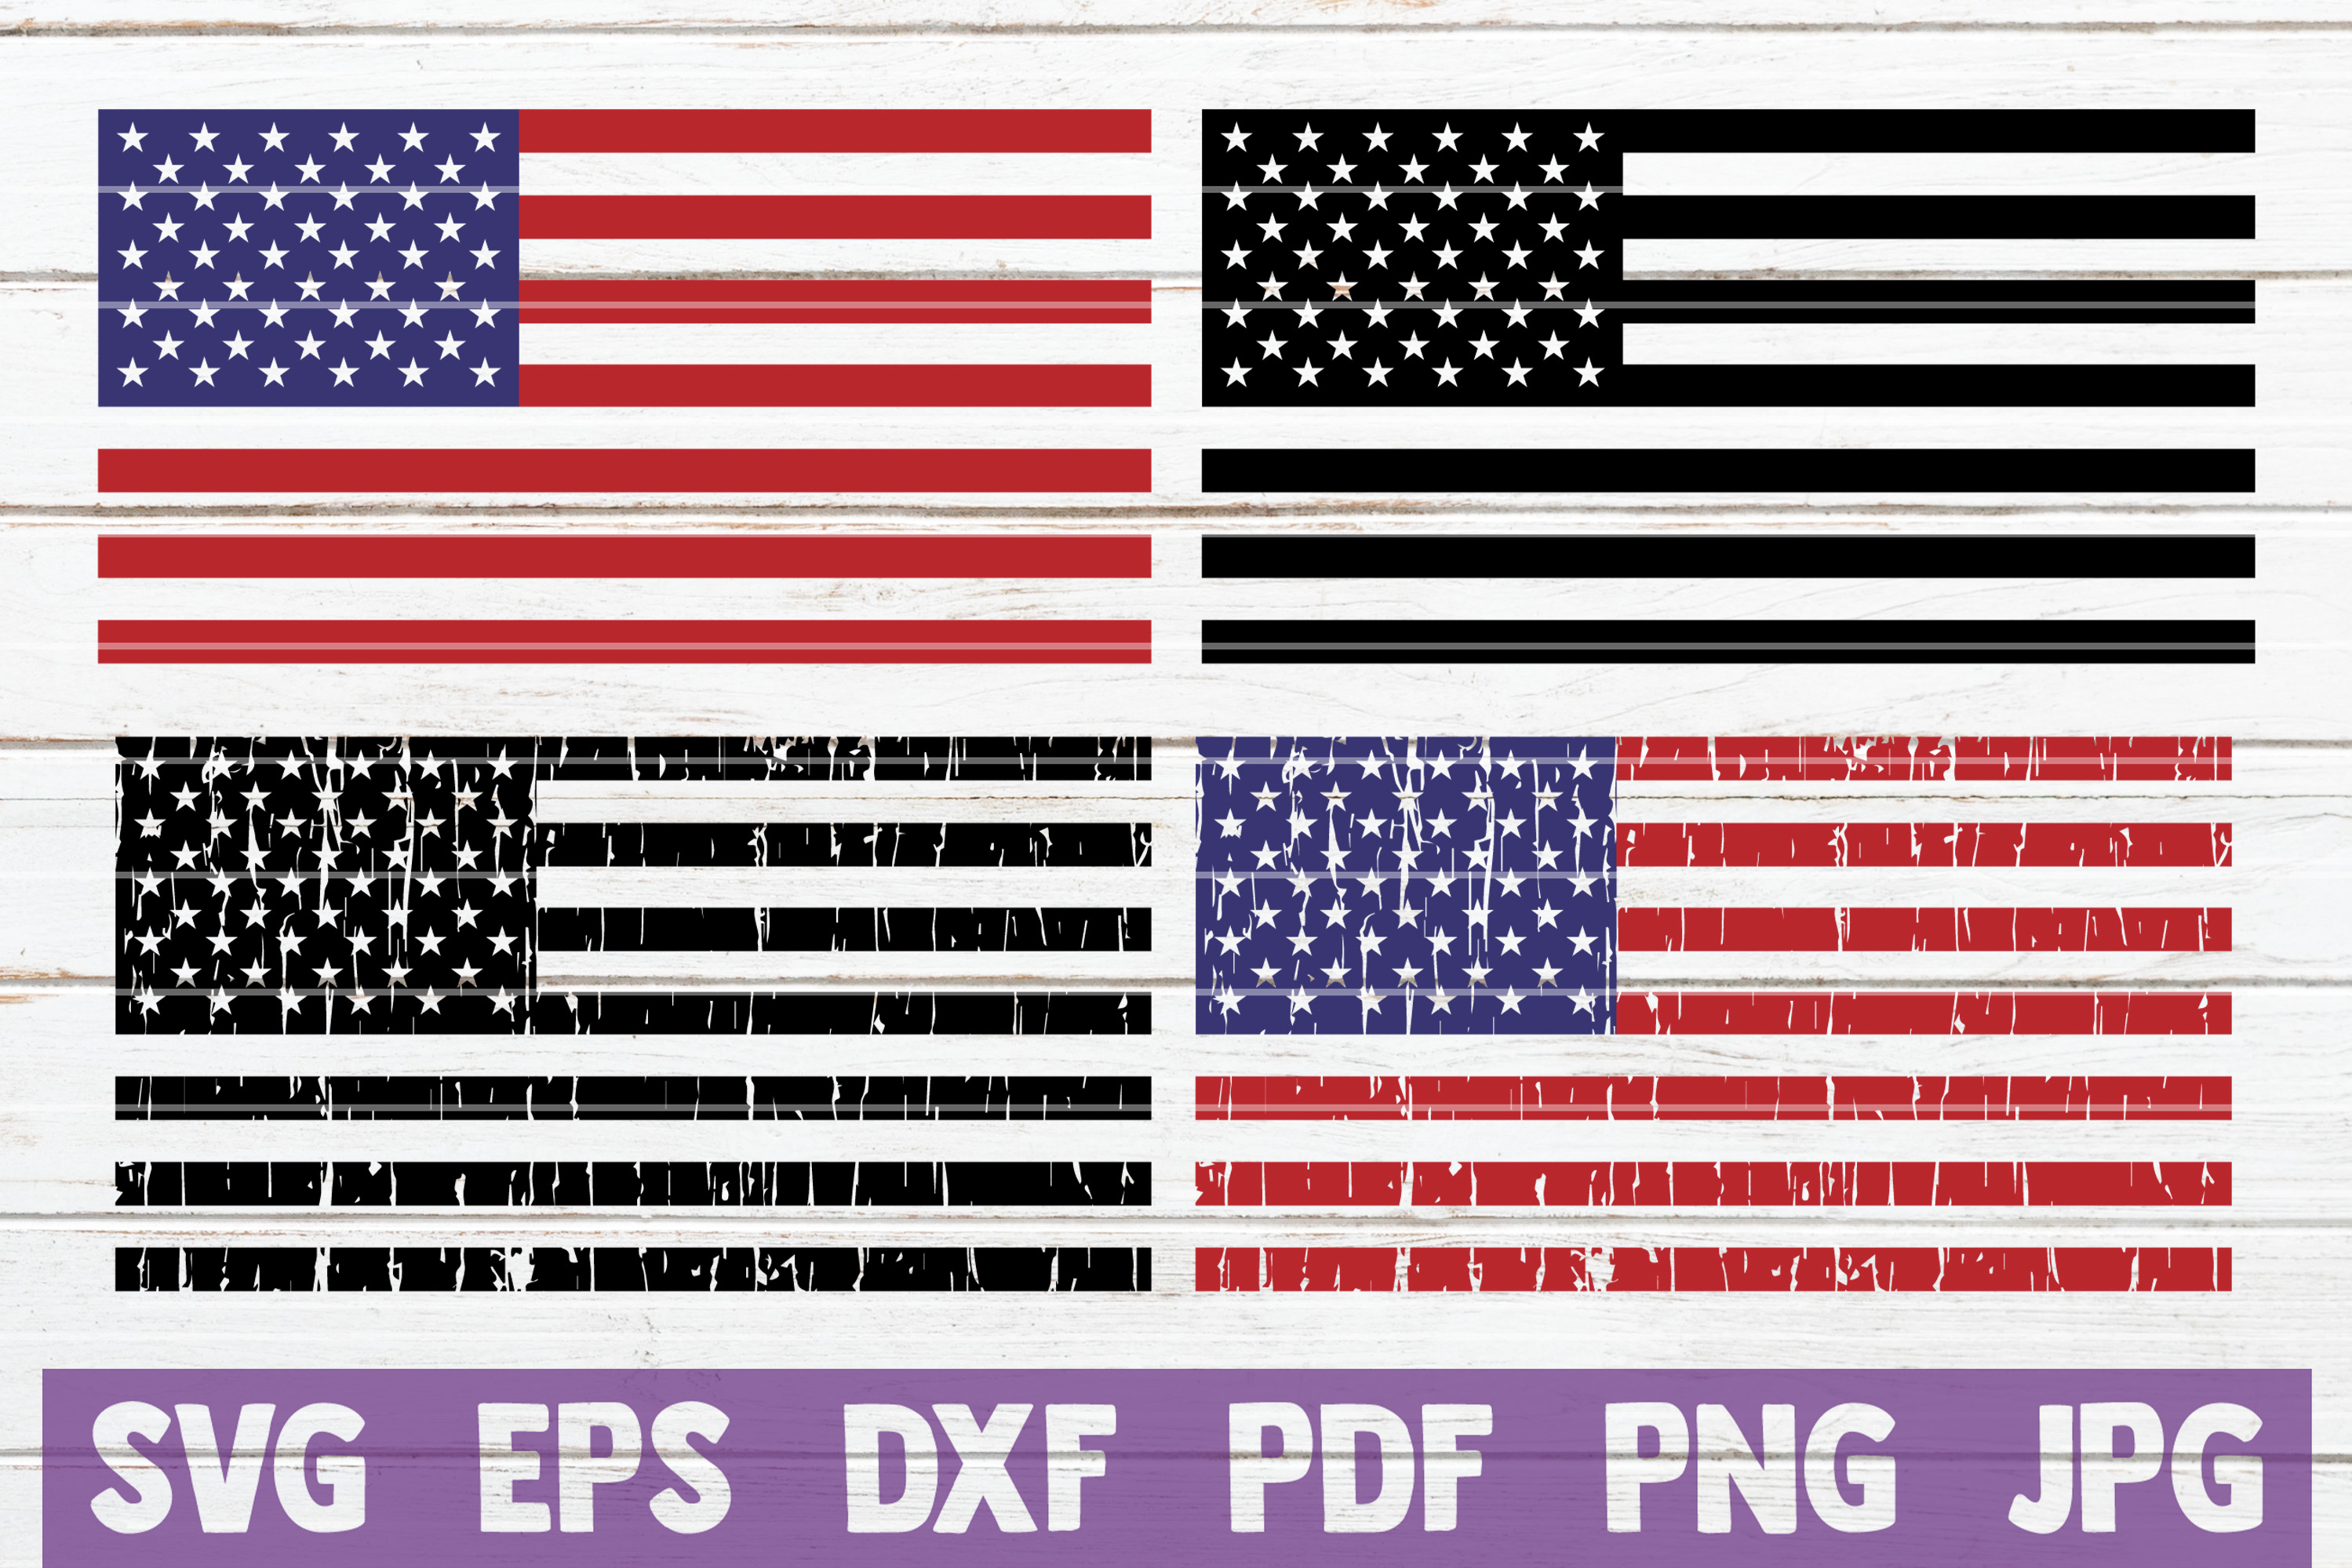 6 Distressed American Flags SVG Cut Files | commercial use (219430